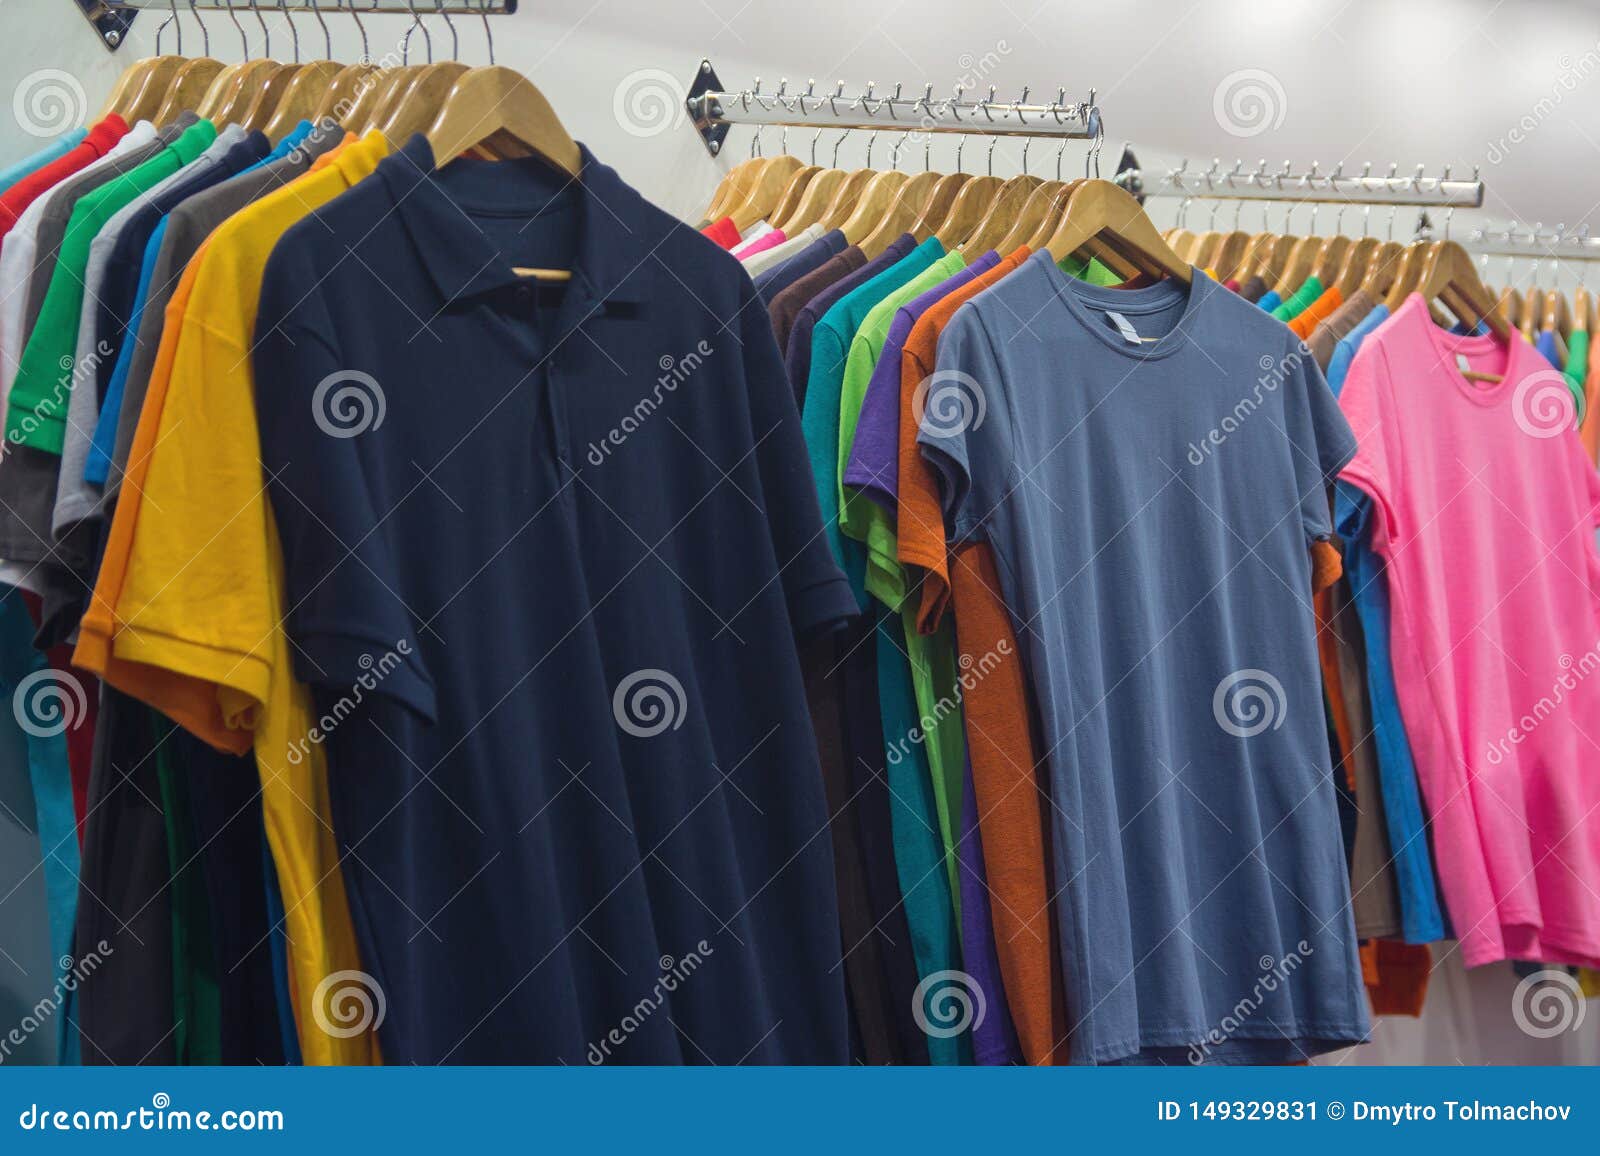 Variety of T-shirts of Different Colors Stock Image - Image of colors ...